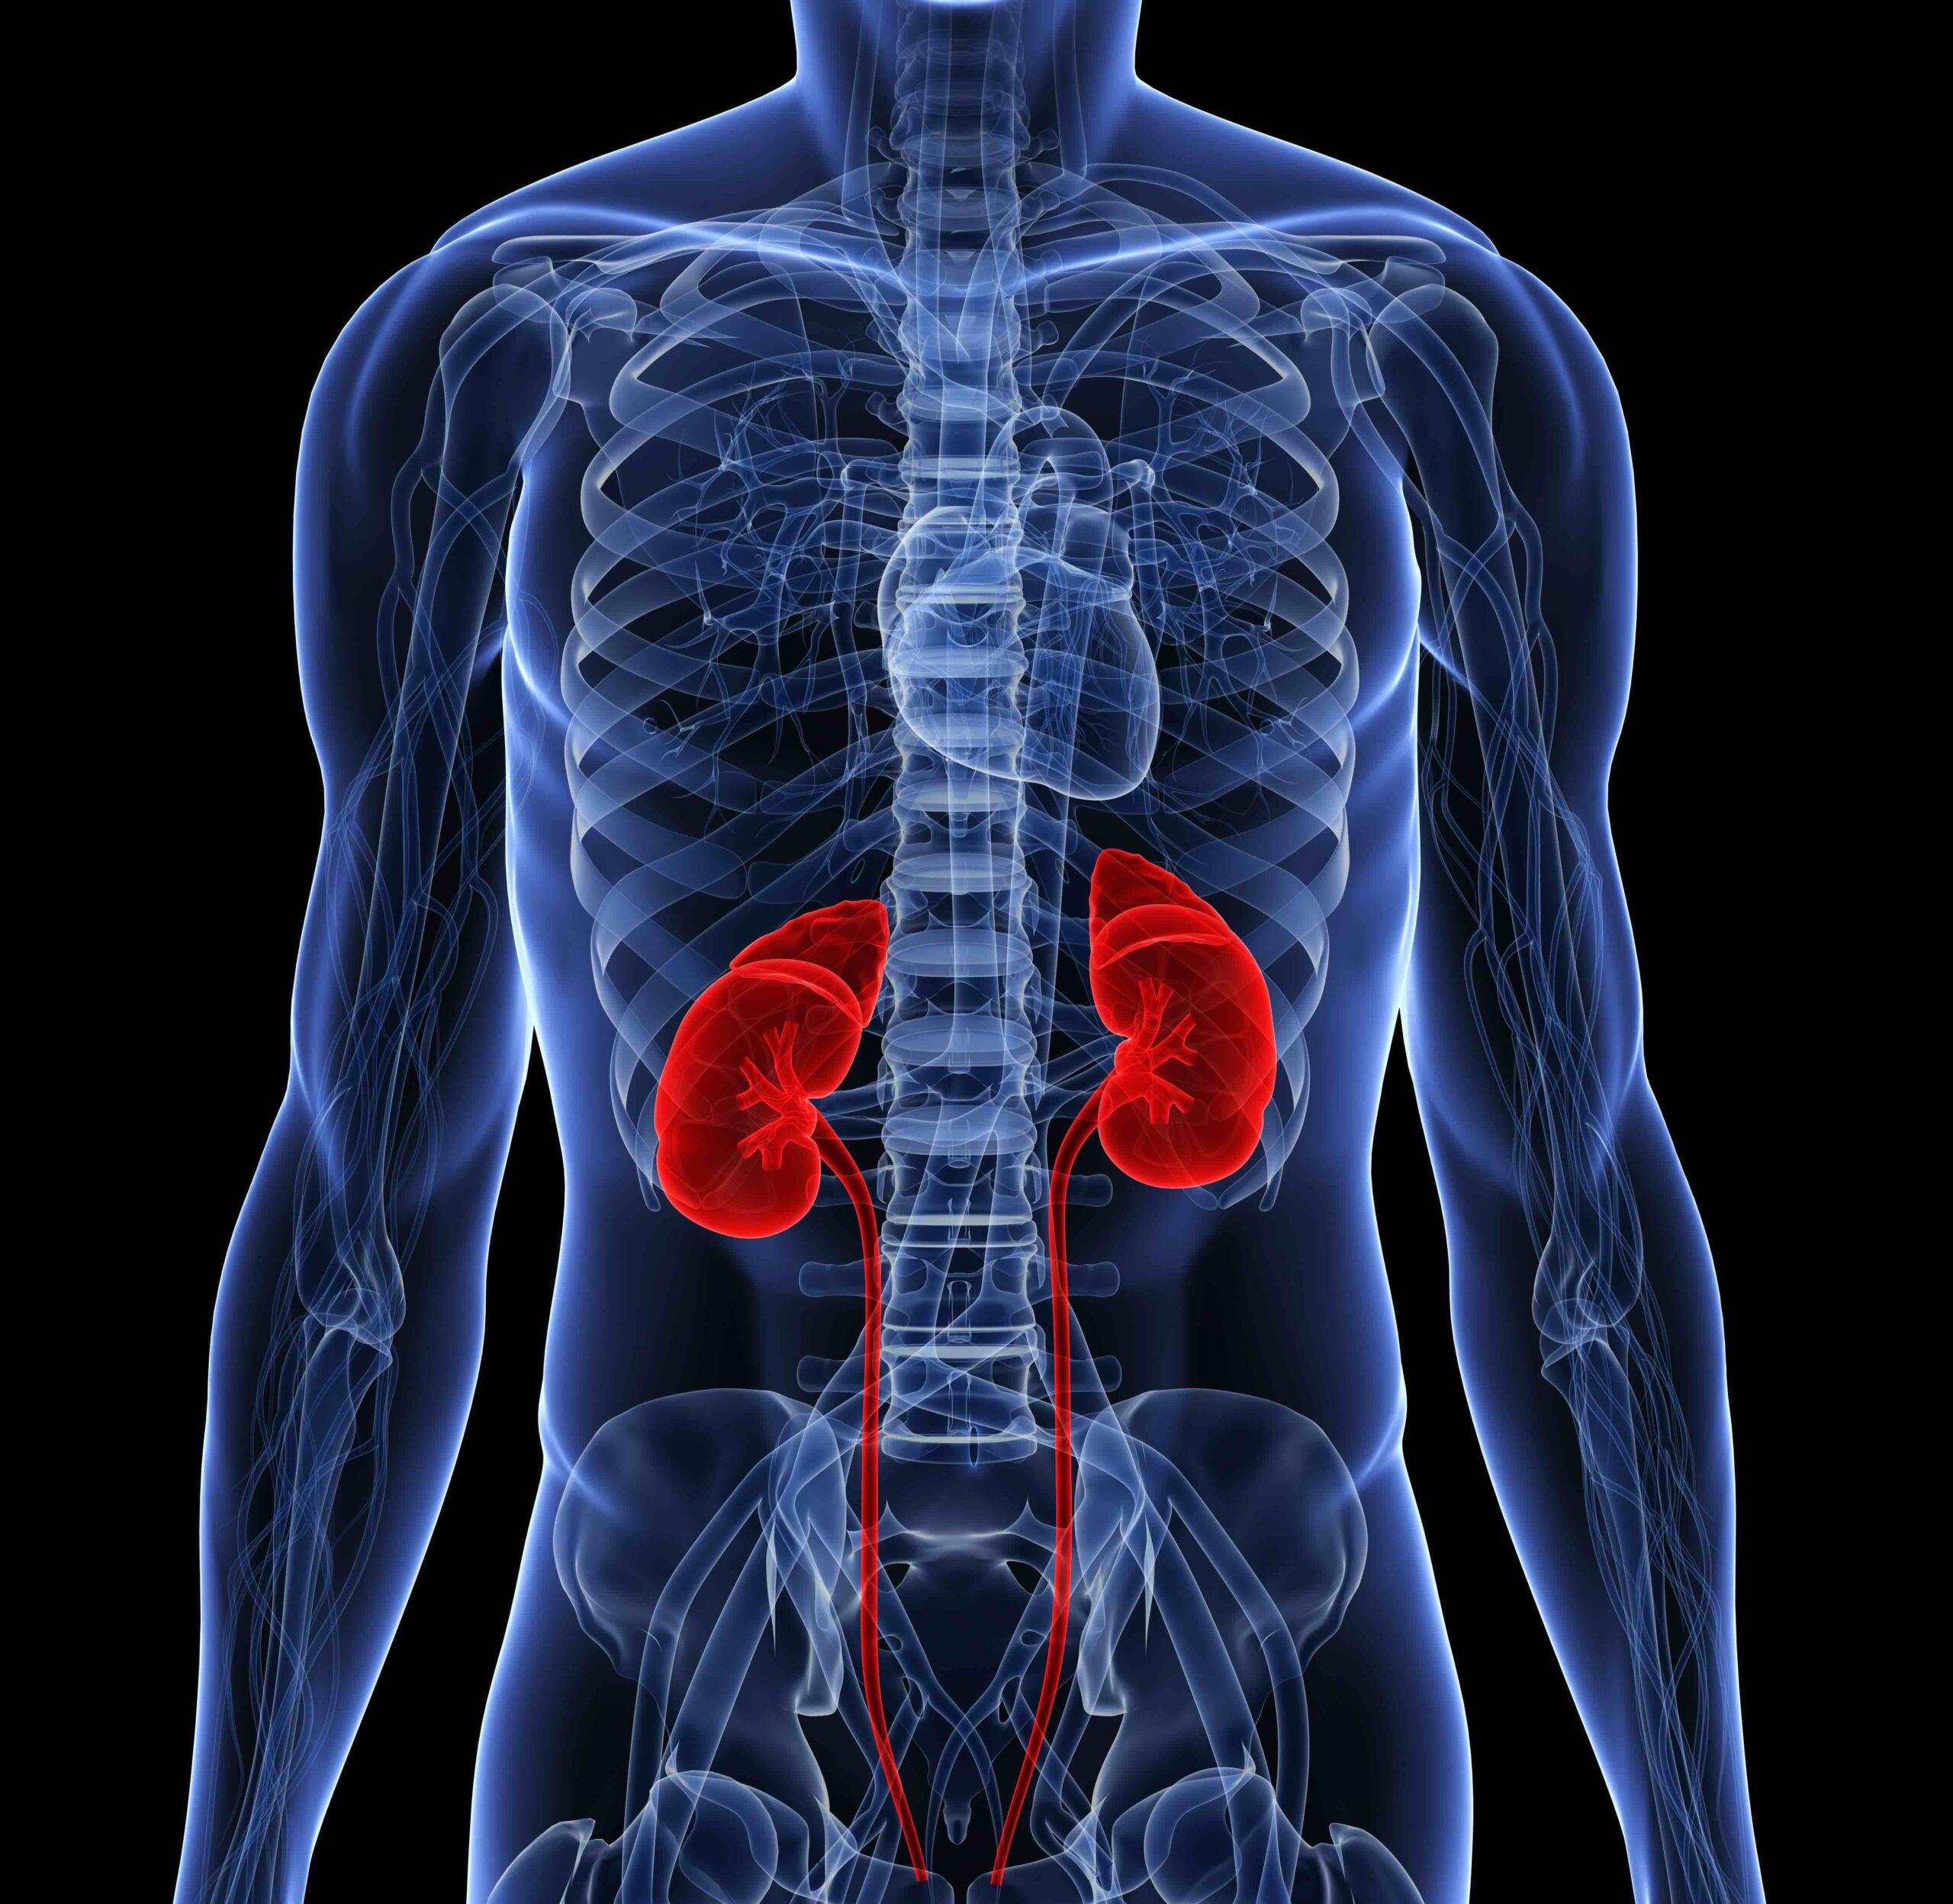 Healthy kidneys and food